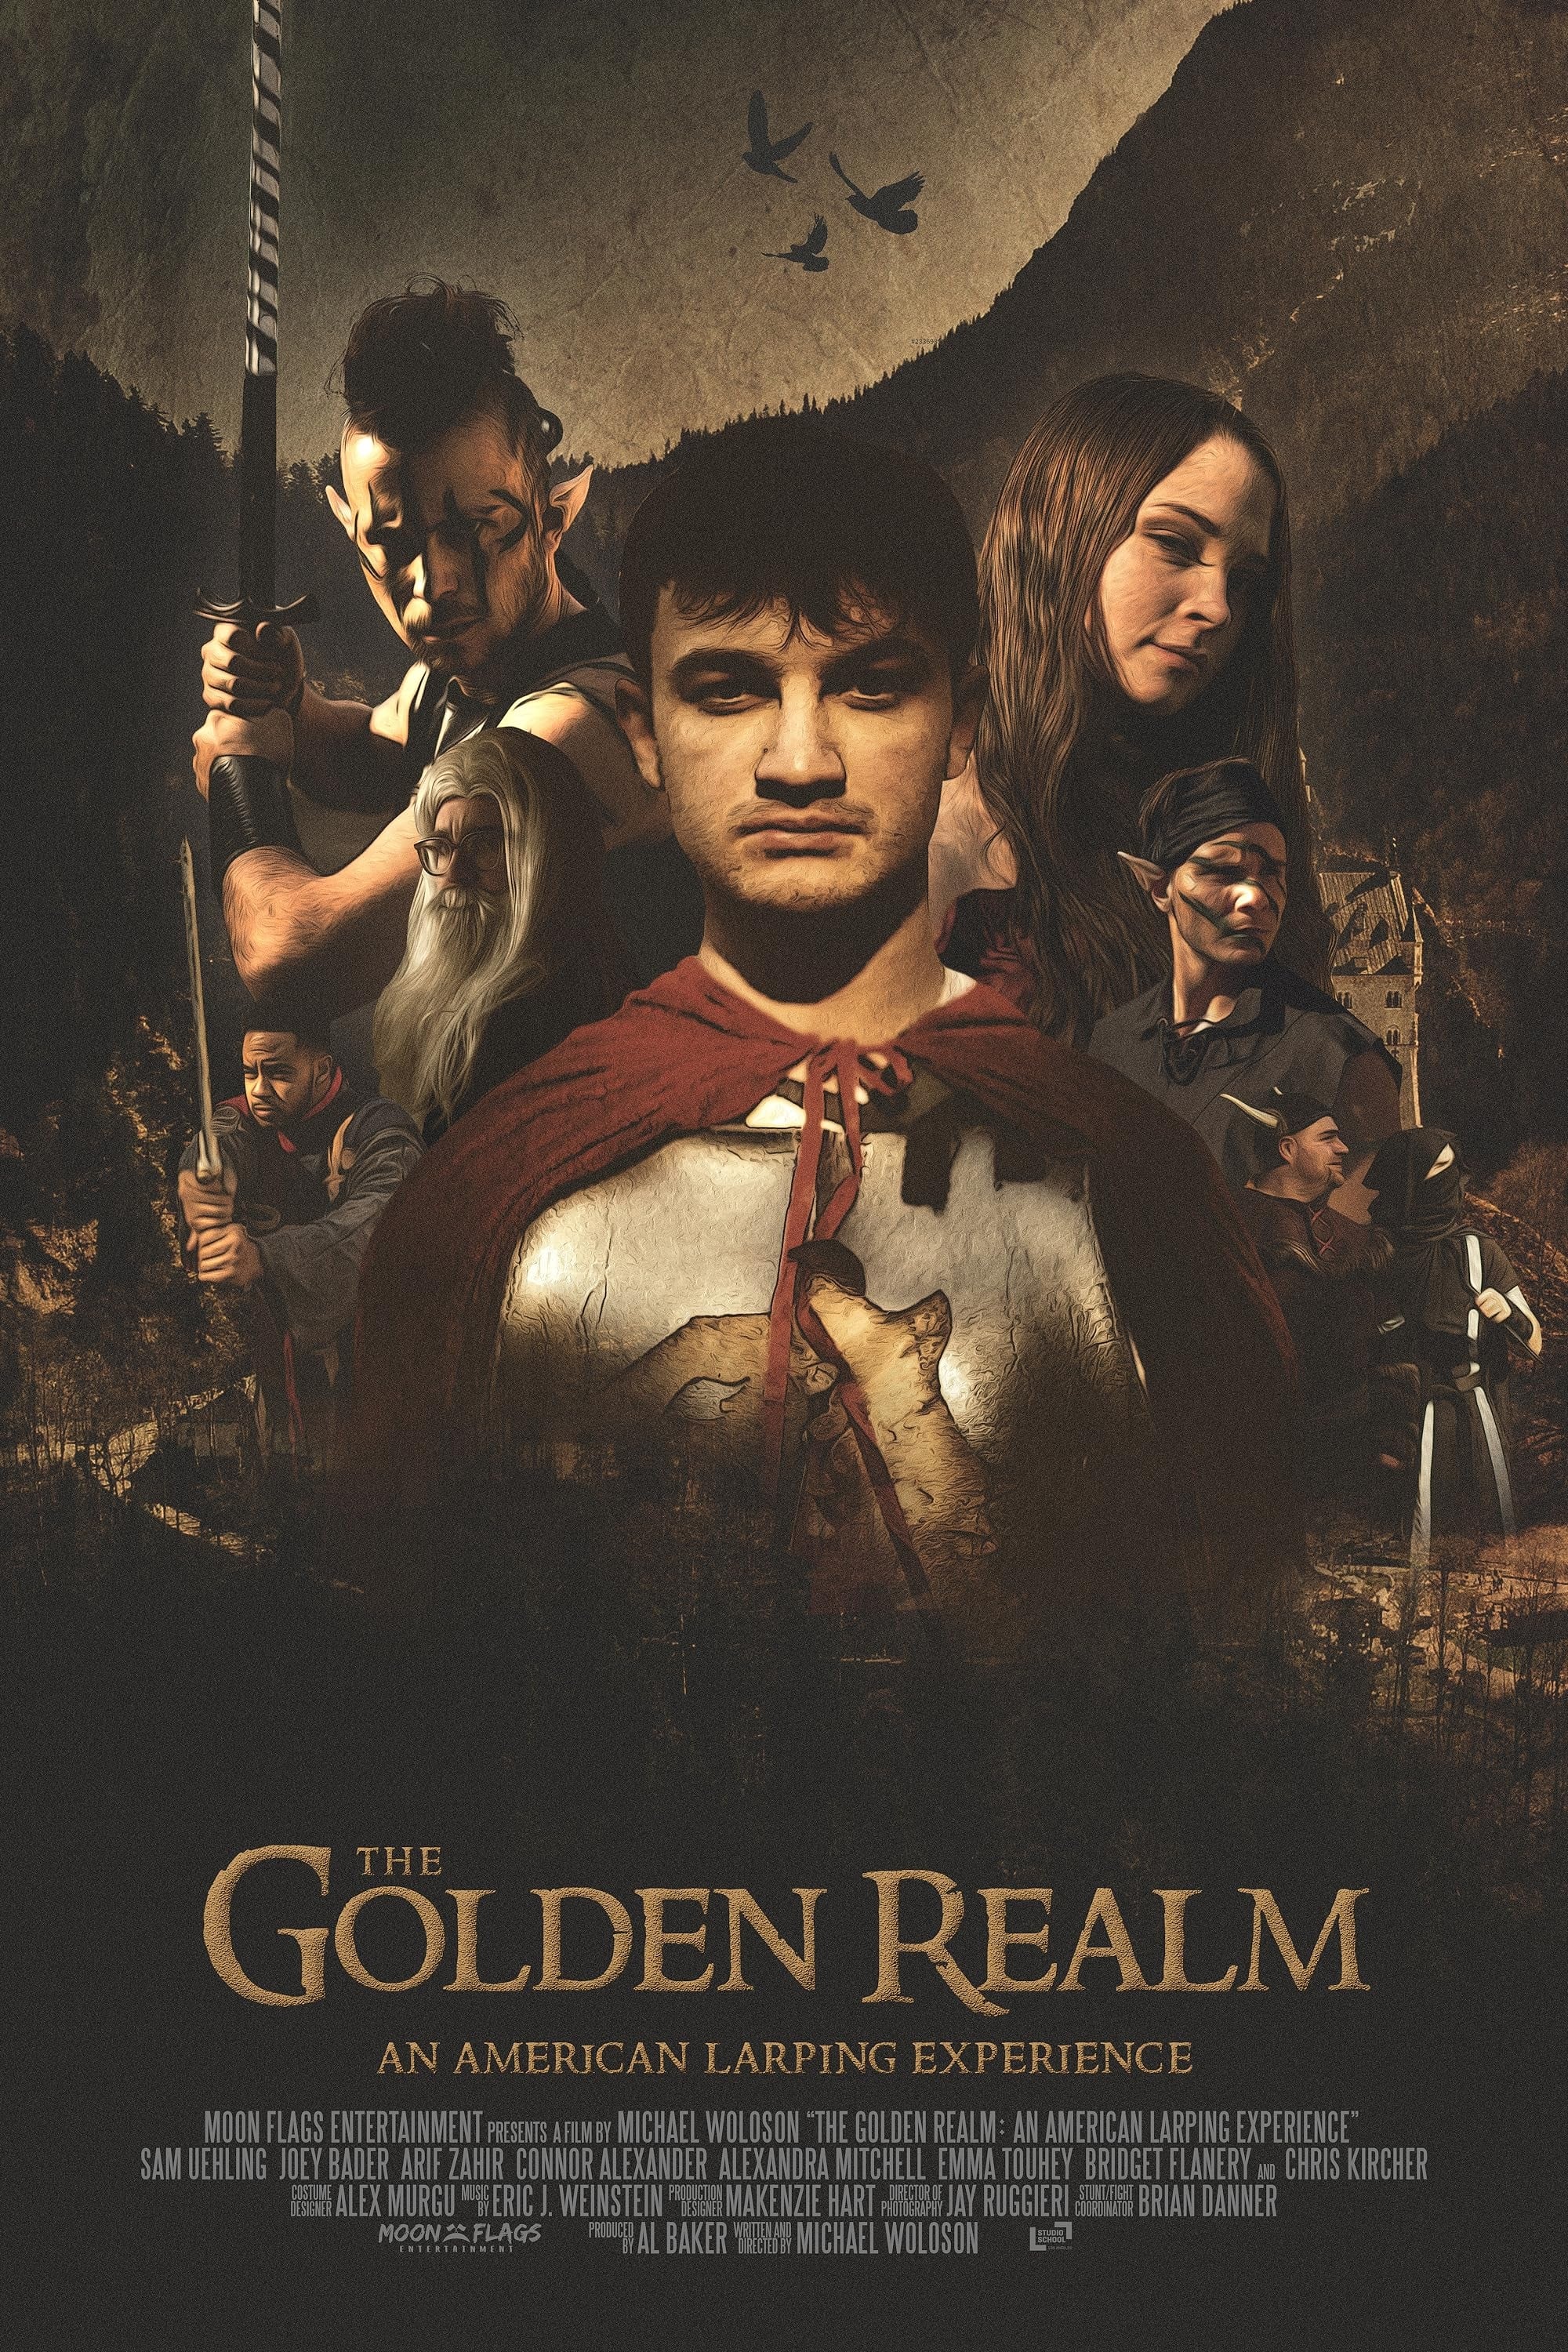 The Golden Realm: An American Larping Experience